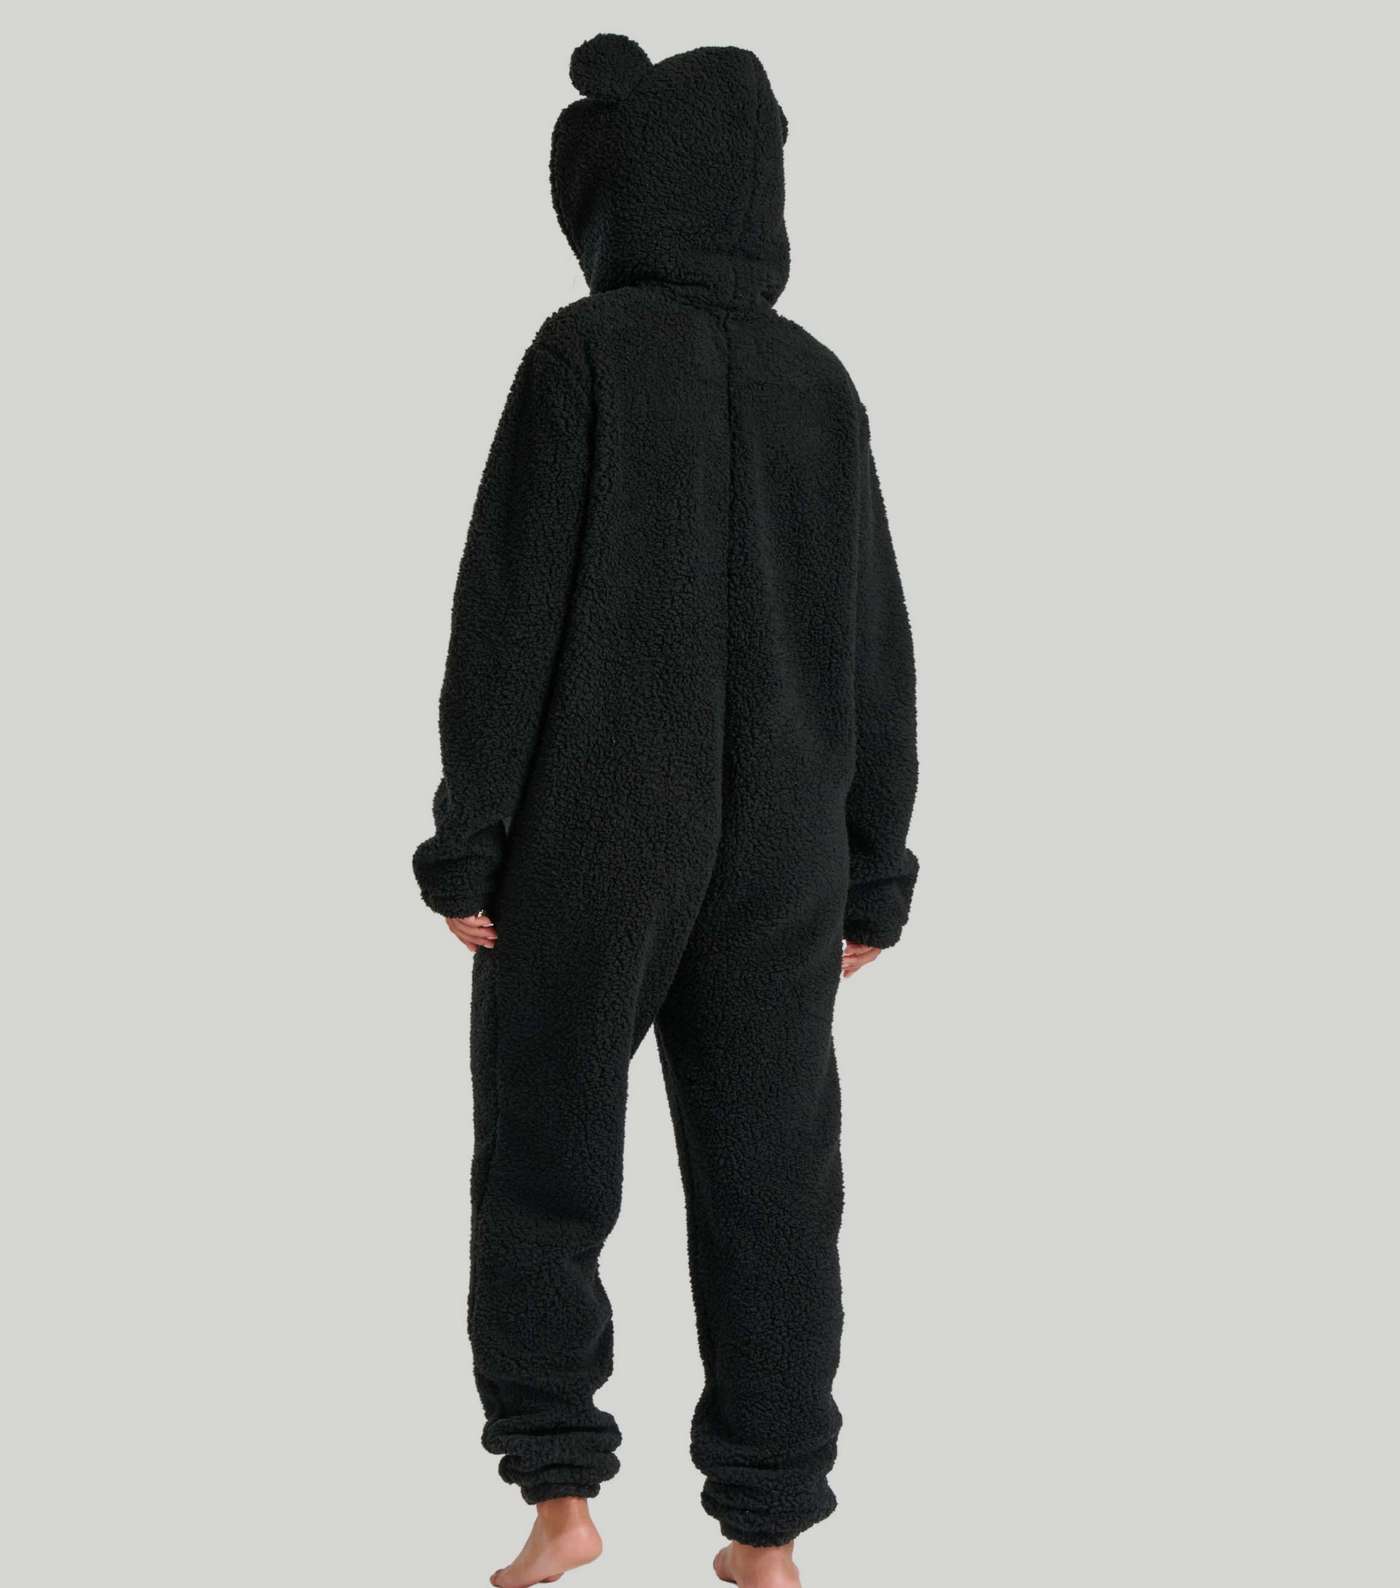 Loungeable Black Borg Onesie with Ears Image 4